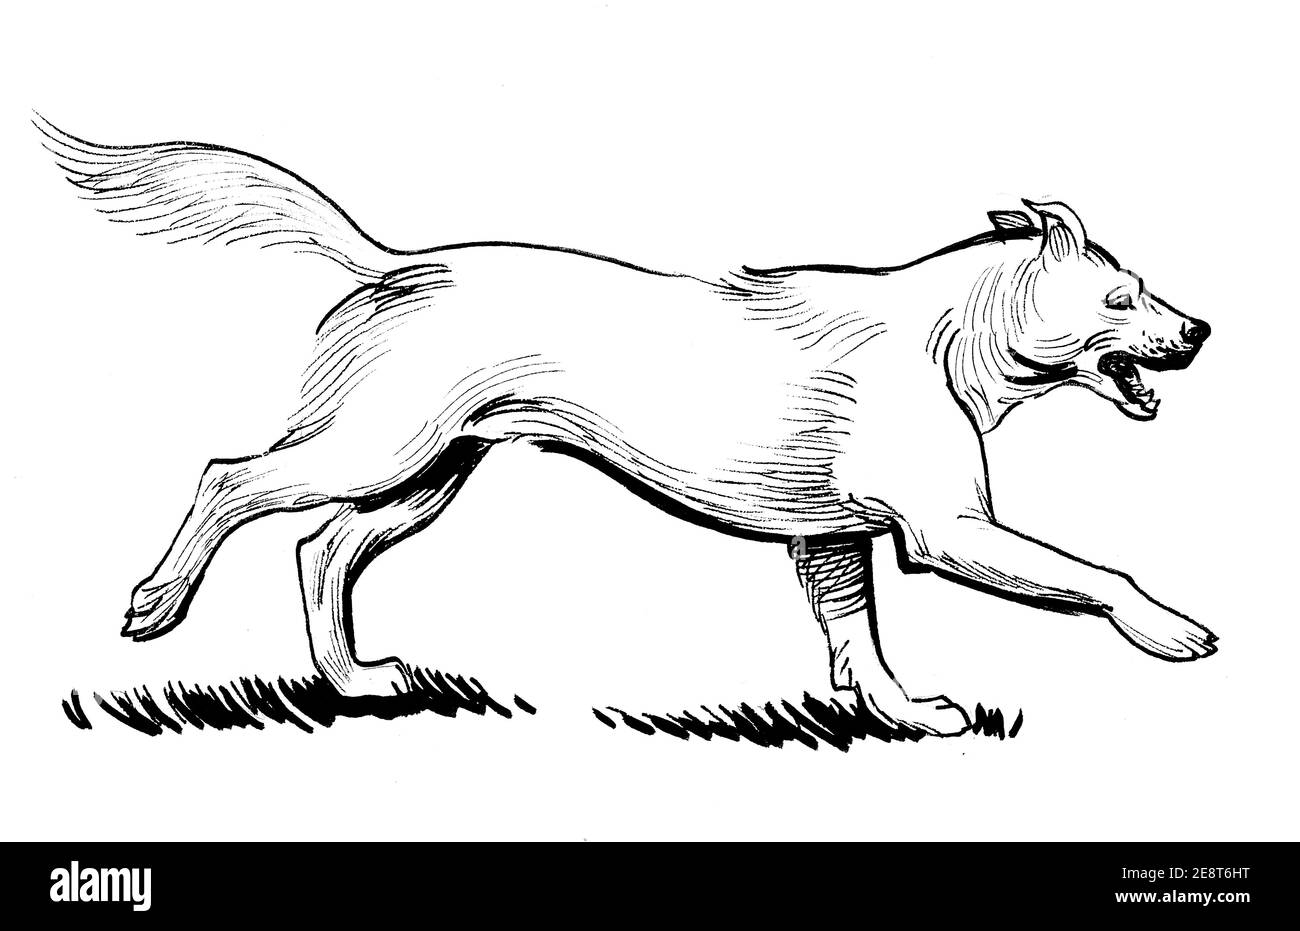 Running dog. Ink black and white drawing Stock Photo - Alamy